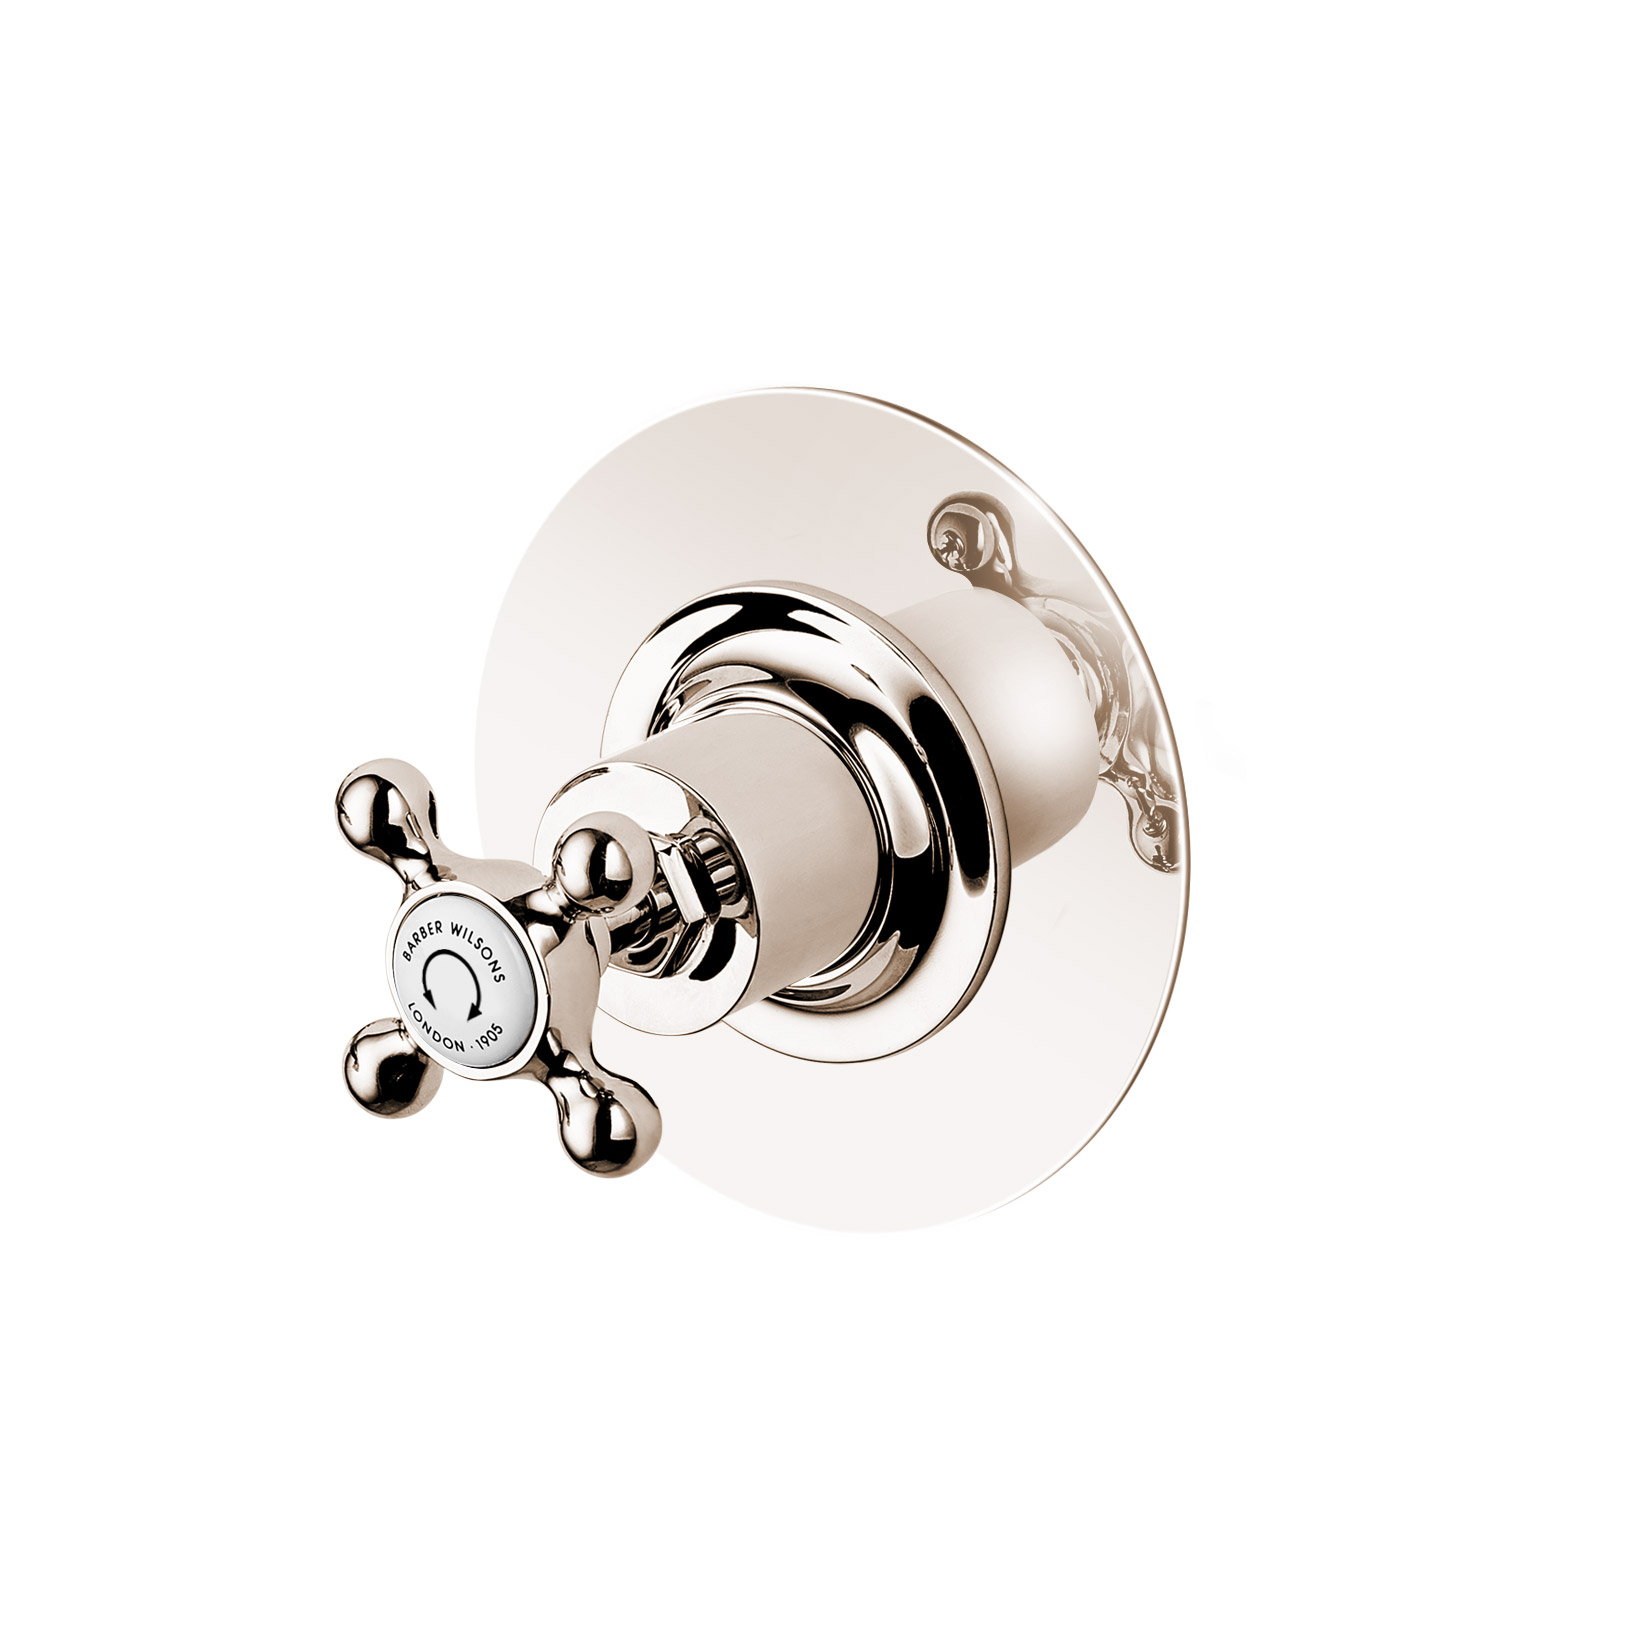 Regent two way shower diverter on a rounded 5” plate